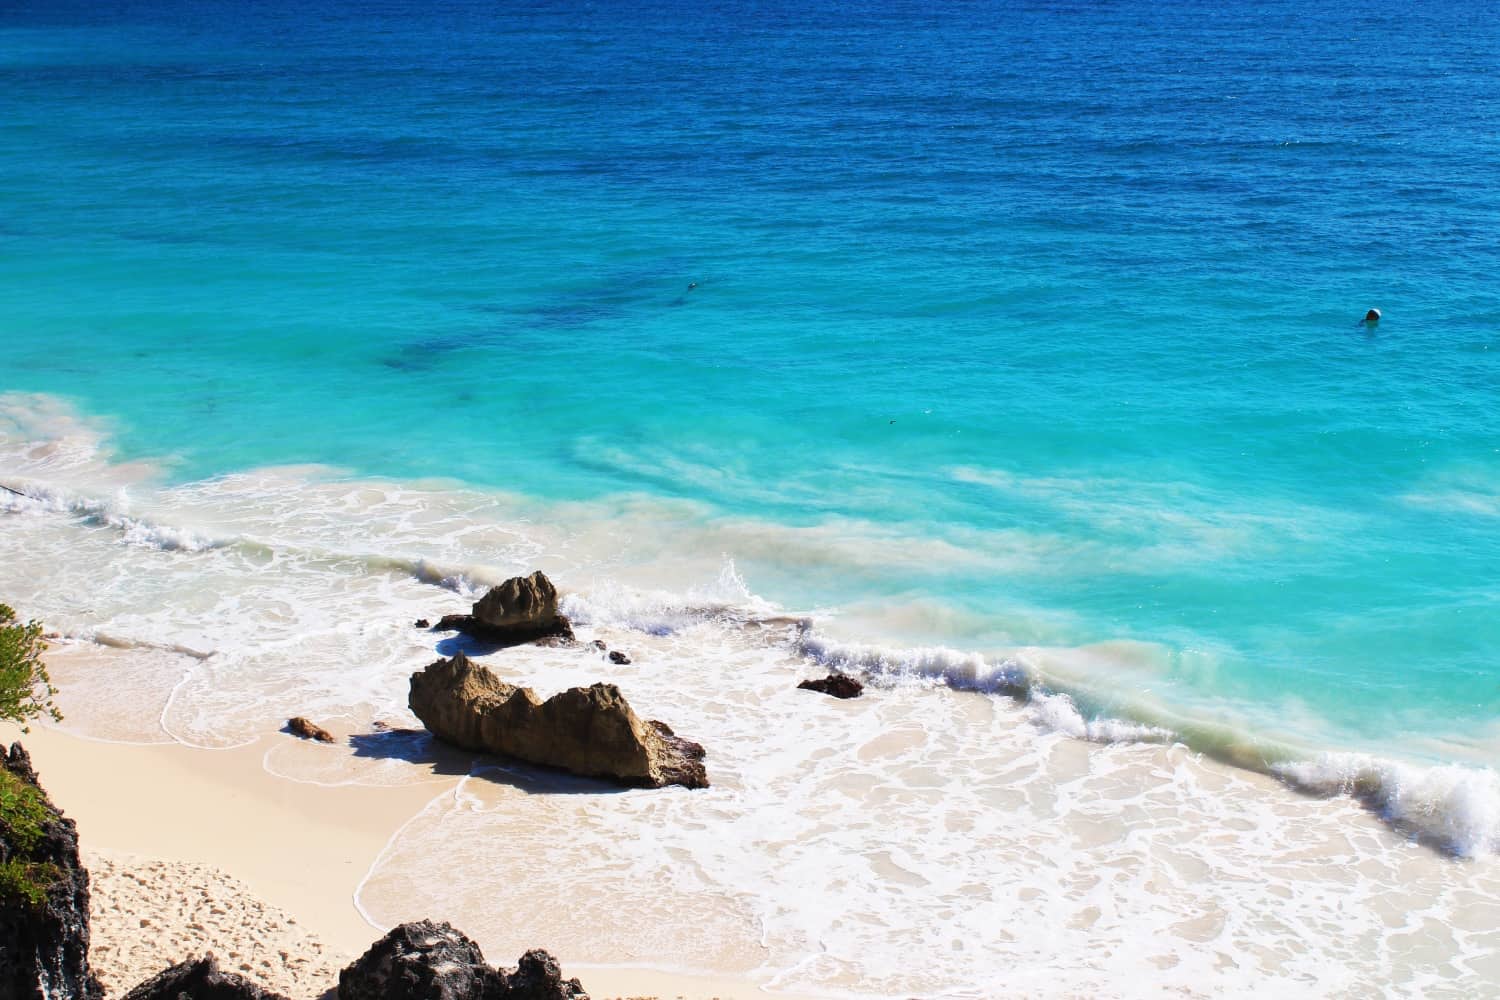 The colour of the water in Tulum